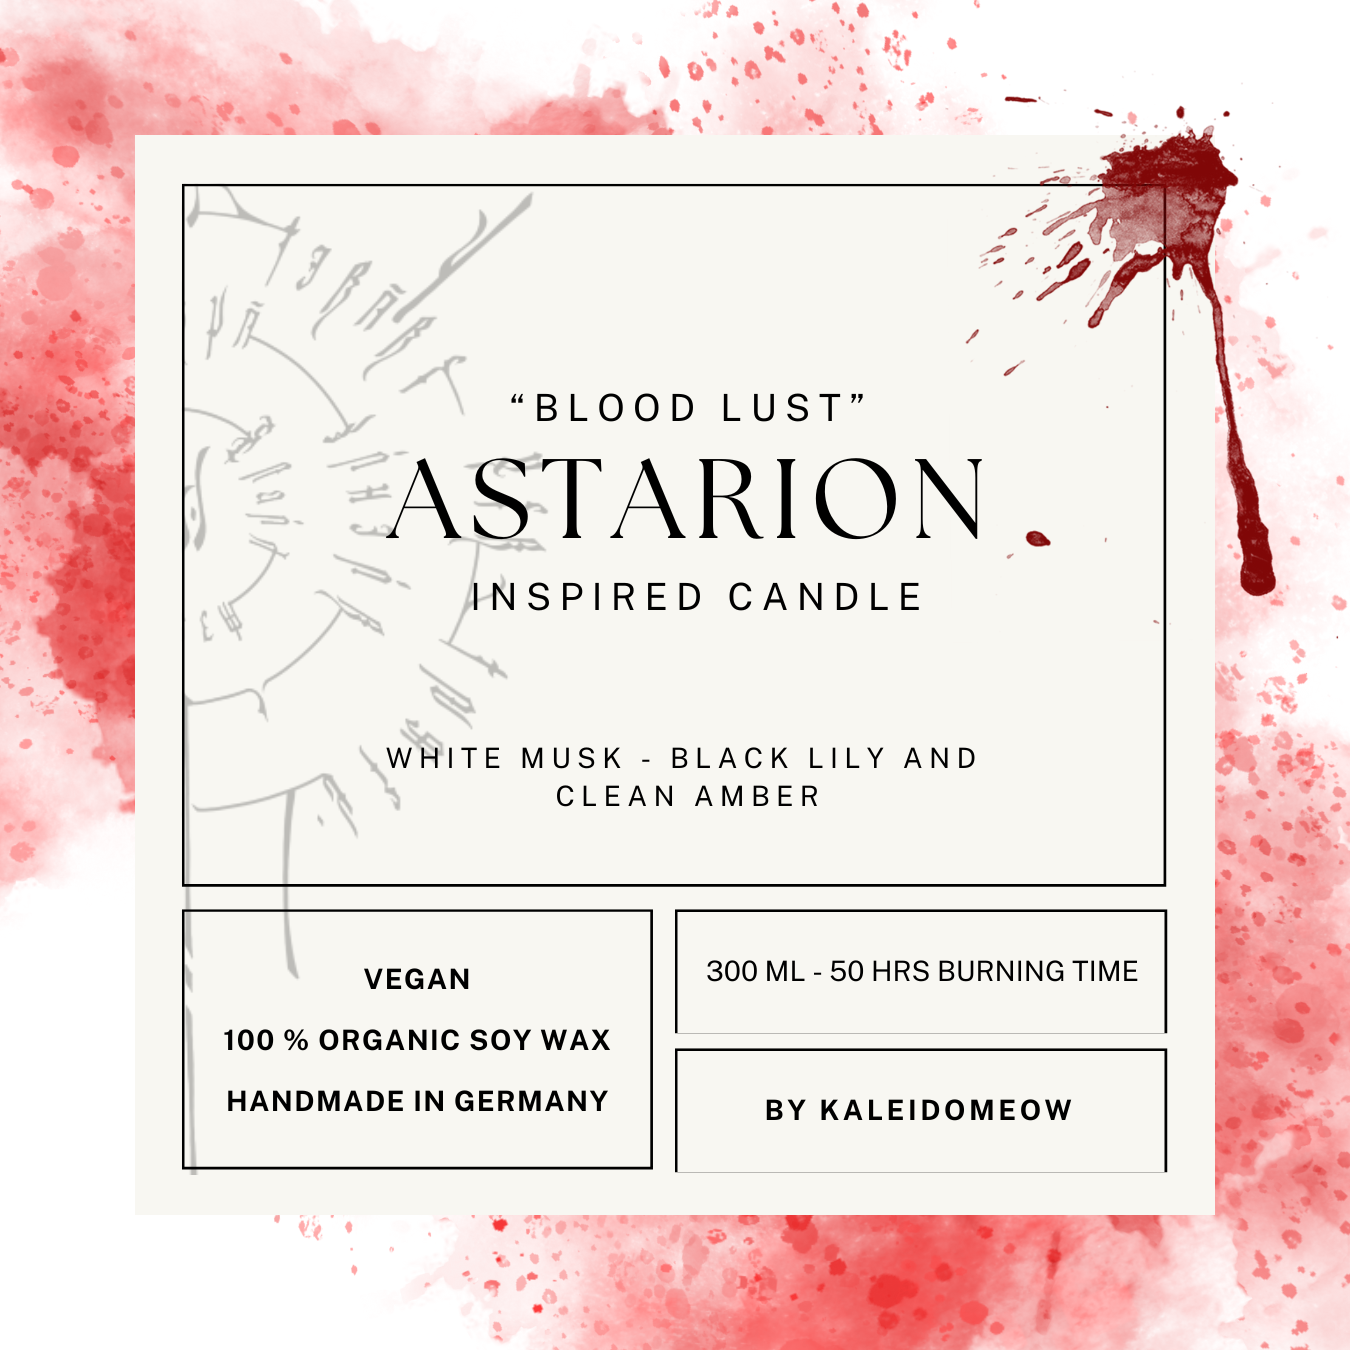 Astarion inspired candle - 'Blood Lust' Baldurs Gate 3 inspired soy Candles 300 ML